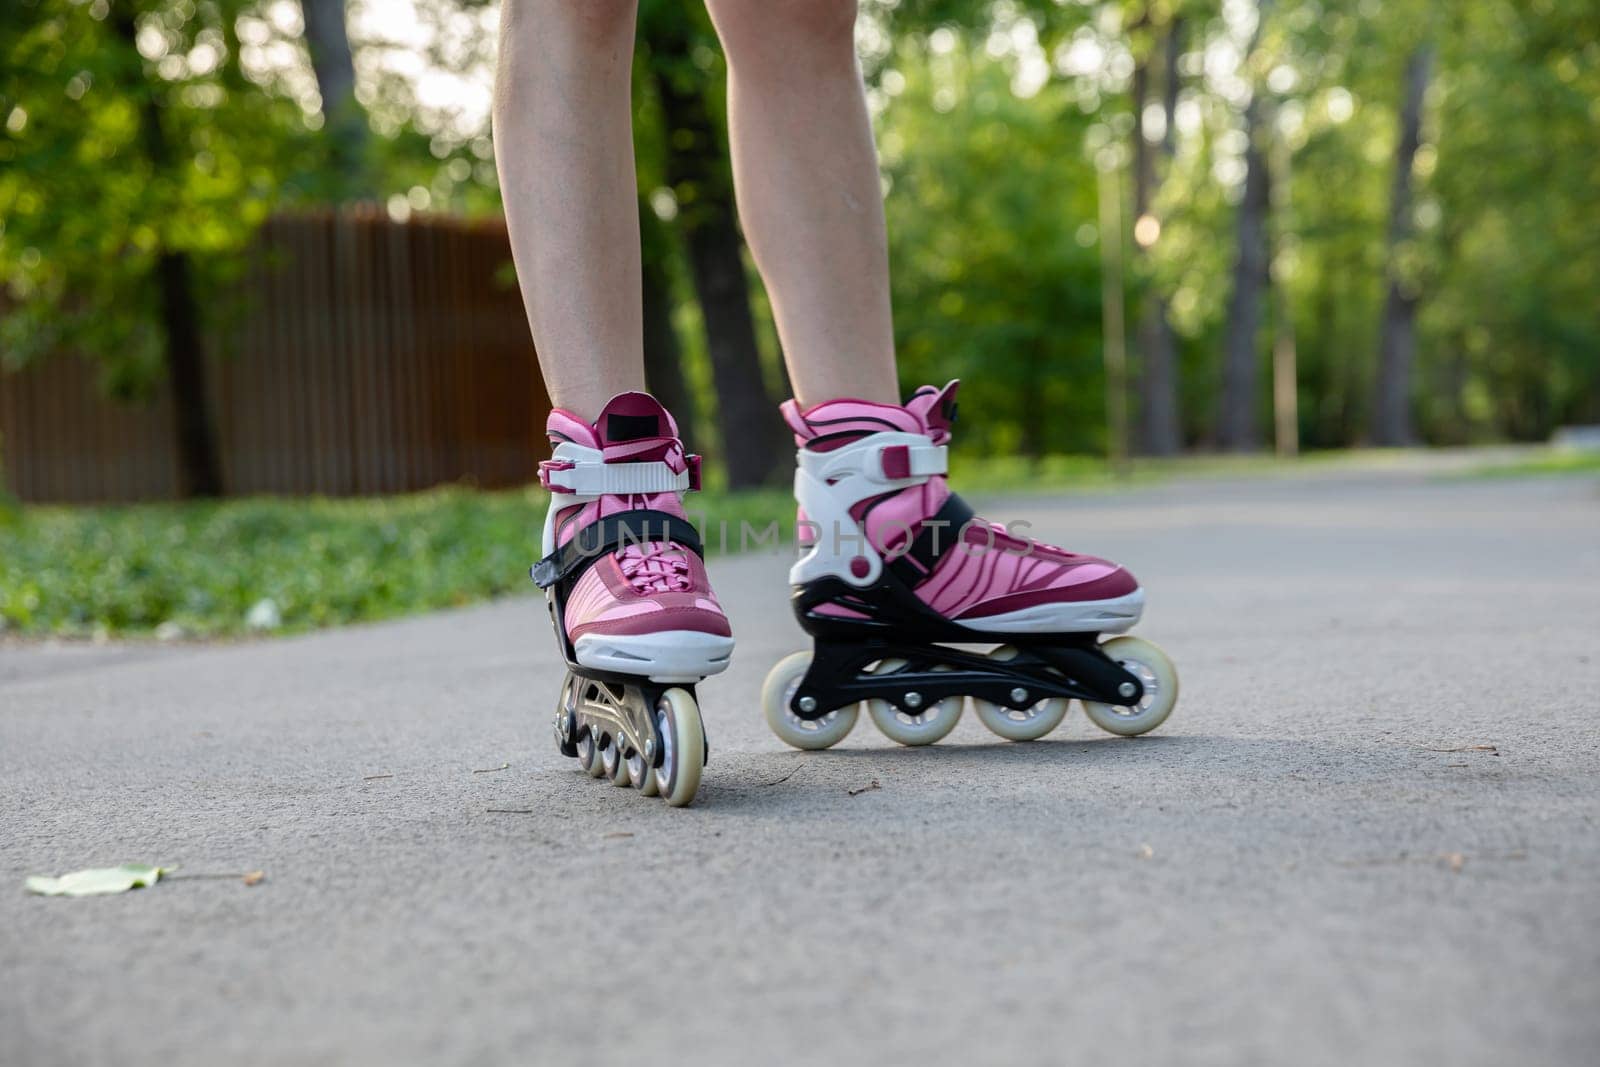 Skater girl riding rollerblades in the park. Rollerblades in fashionable purple and gray colors. Well-fitting sports equipment. Playing sports outdoors.